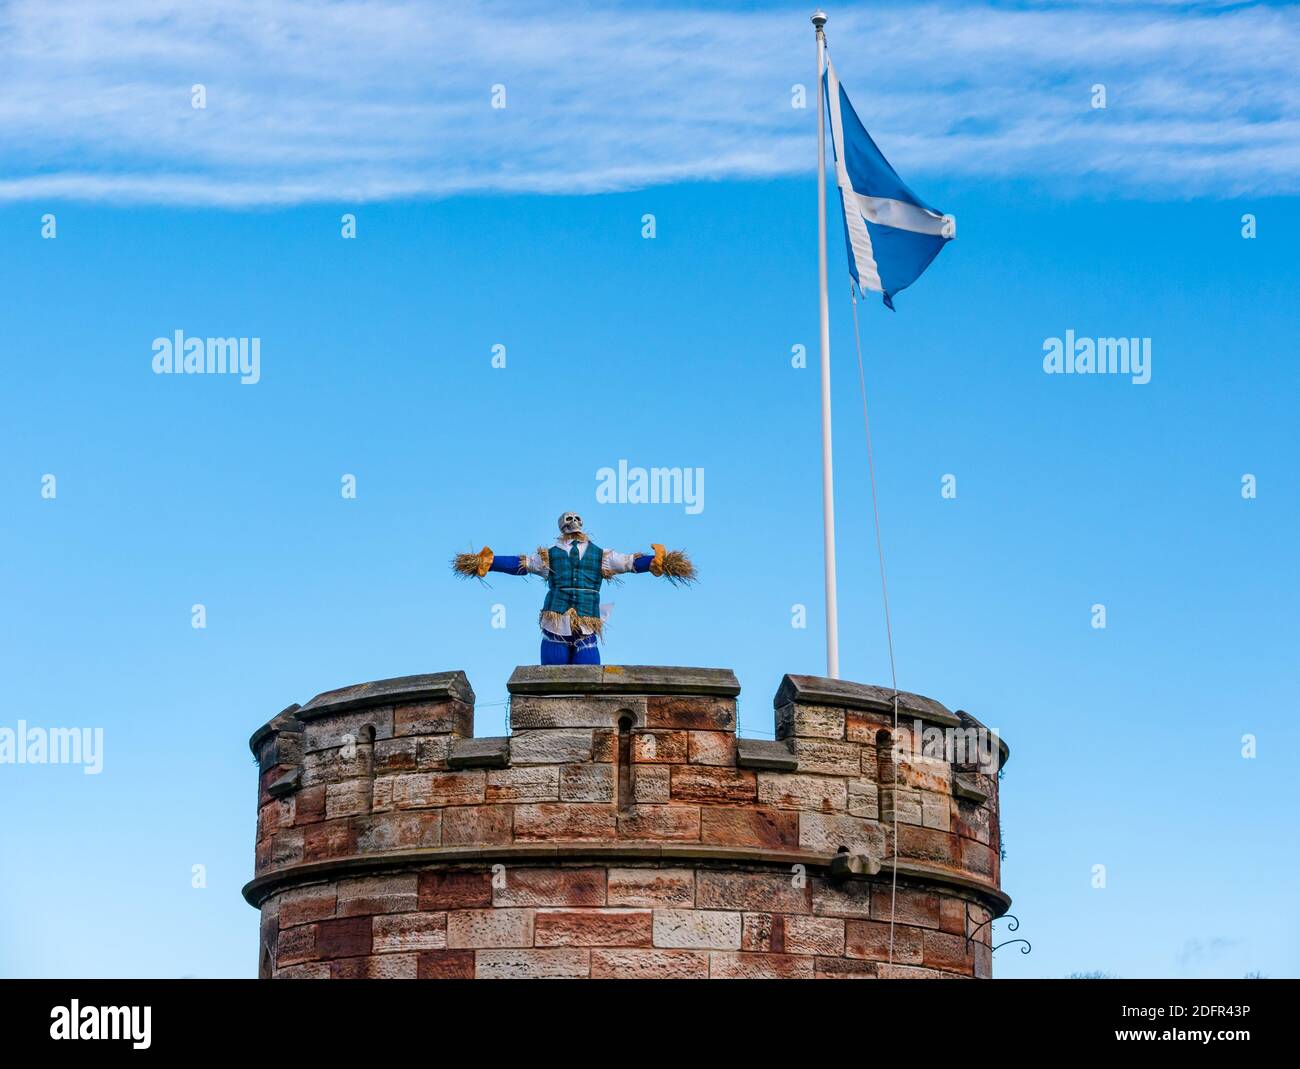 Quirky scarecrow with skull face on top of round tower with saltire flag, Dirleton Castle, East Lothian, Scotland, UK Stock Photo